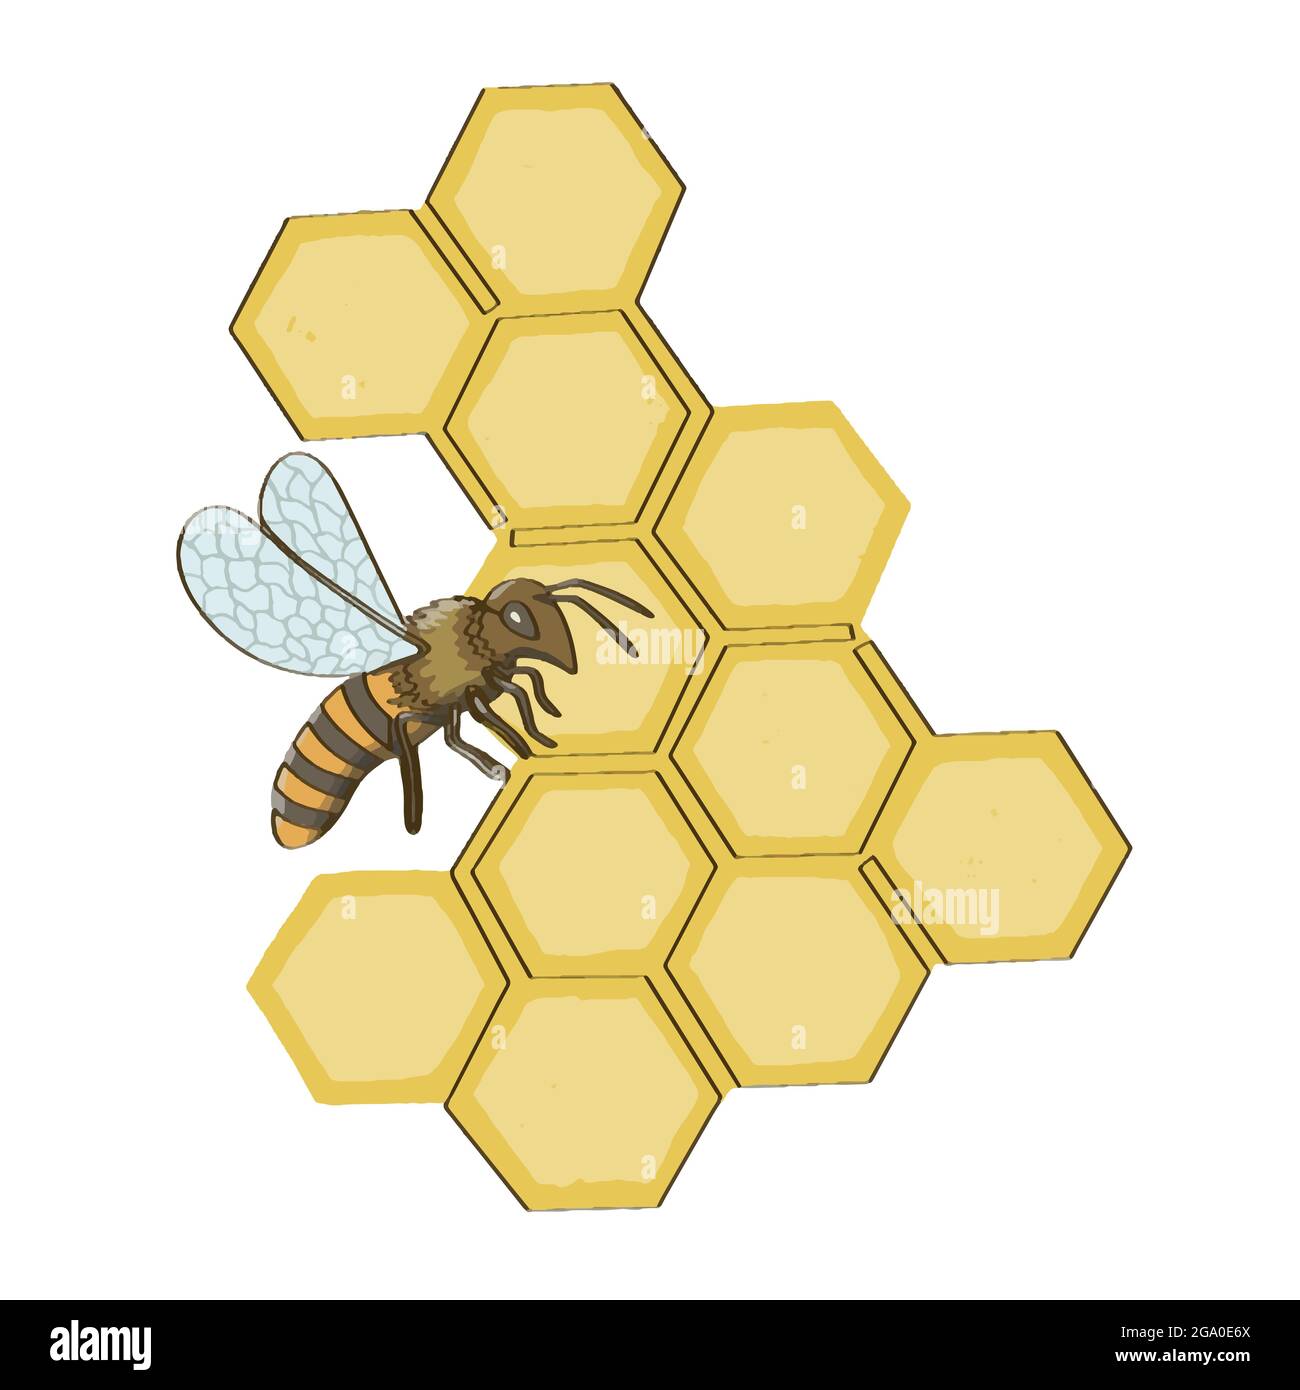 Bee and honeycomb. Isolated on white background stock vector illustration Stock Vector